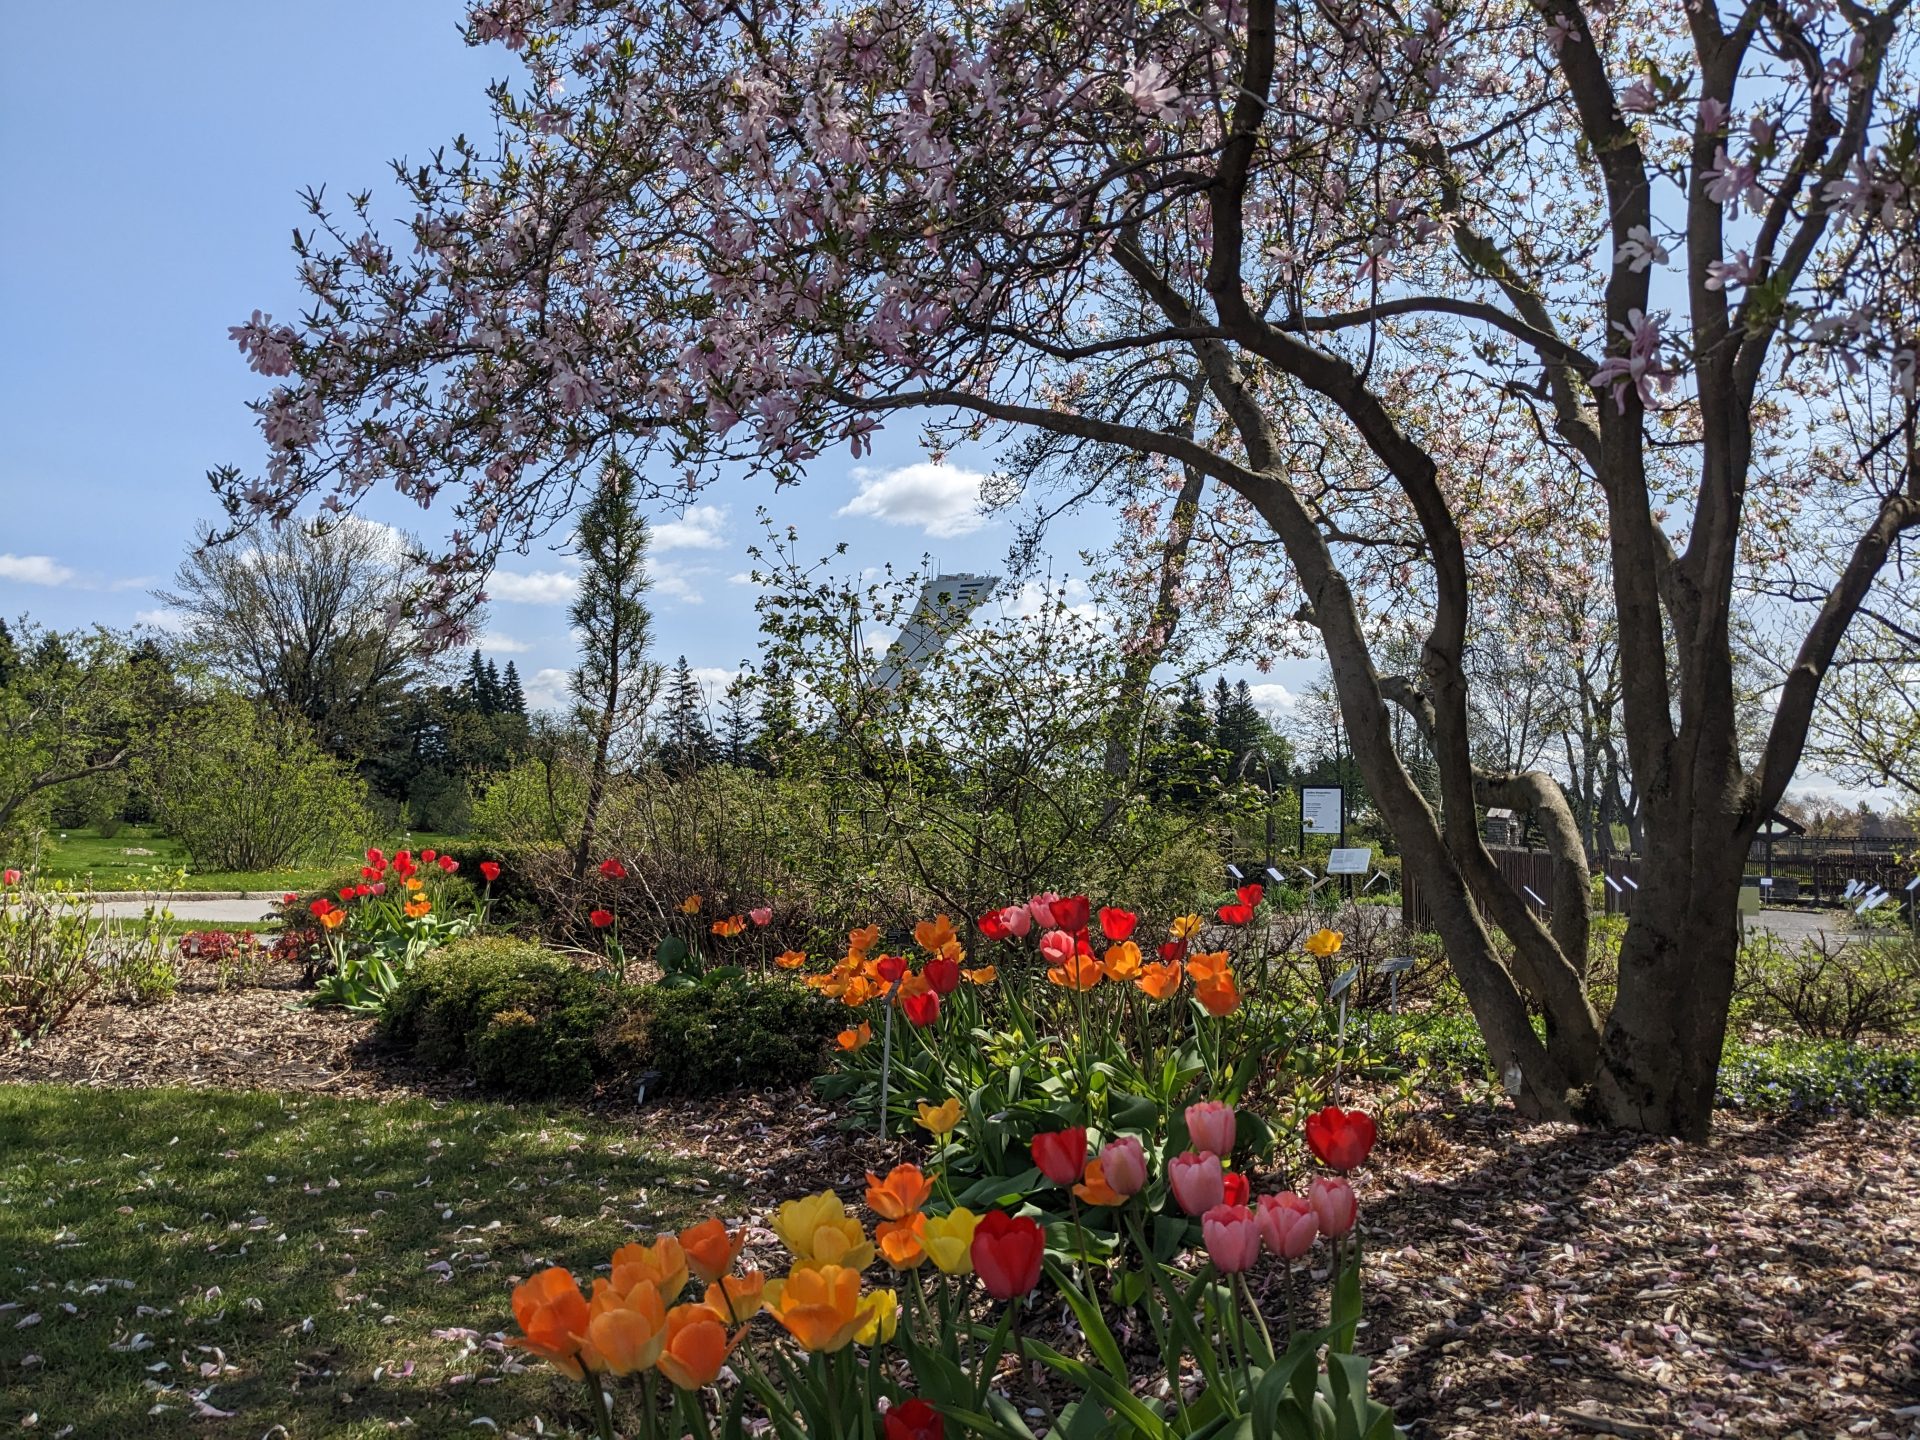 National Public Gardens Day - Second Friday in May